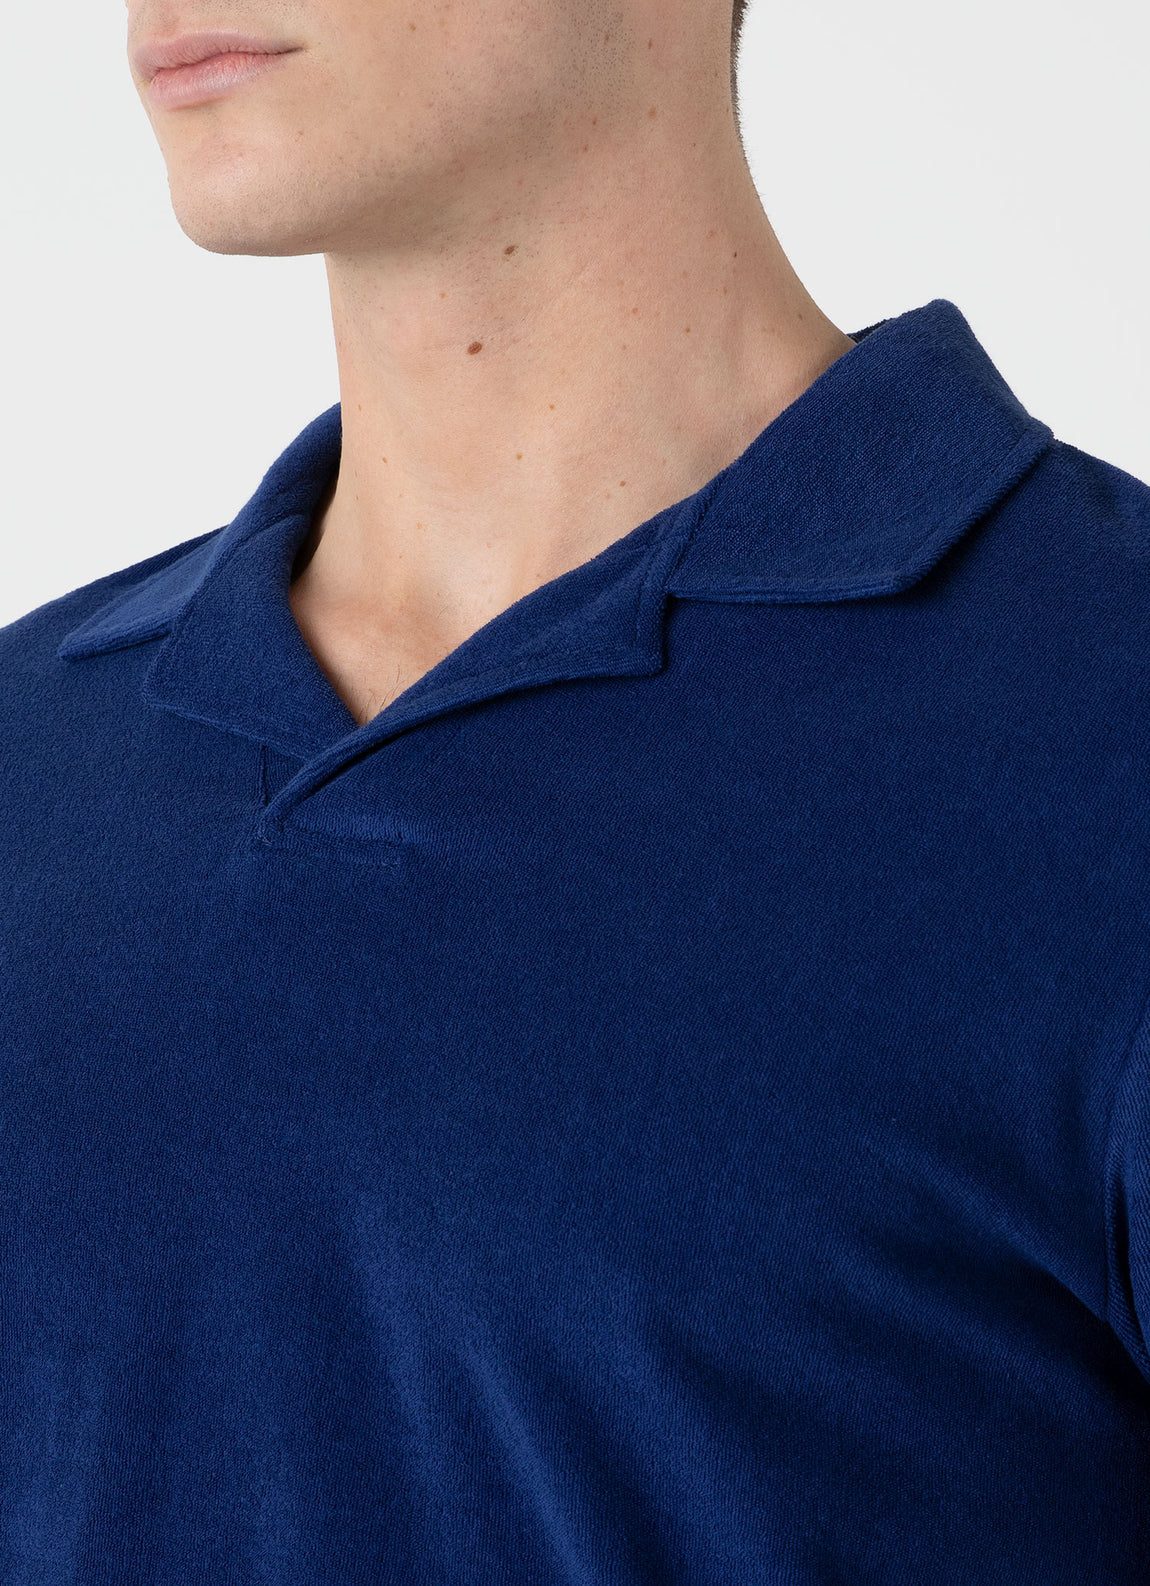 Men's Towelling Polo Shirt in Space Blue